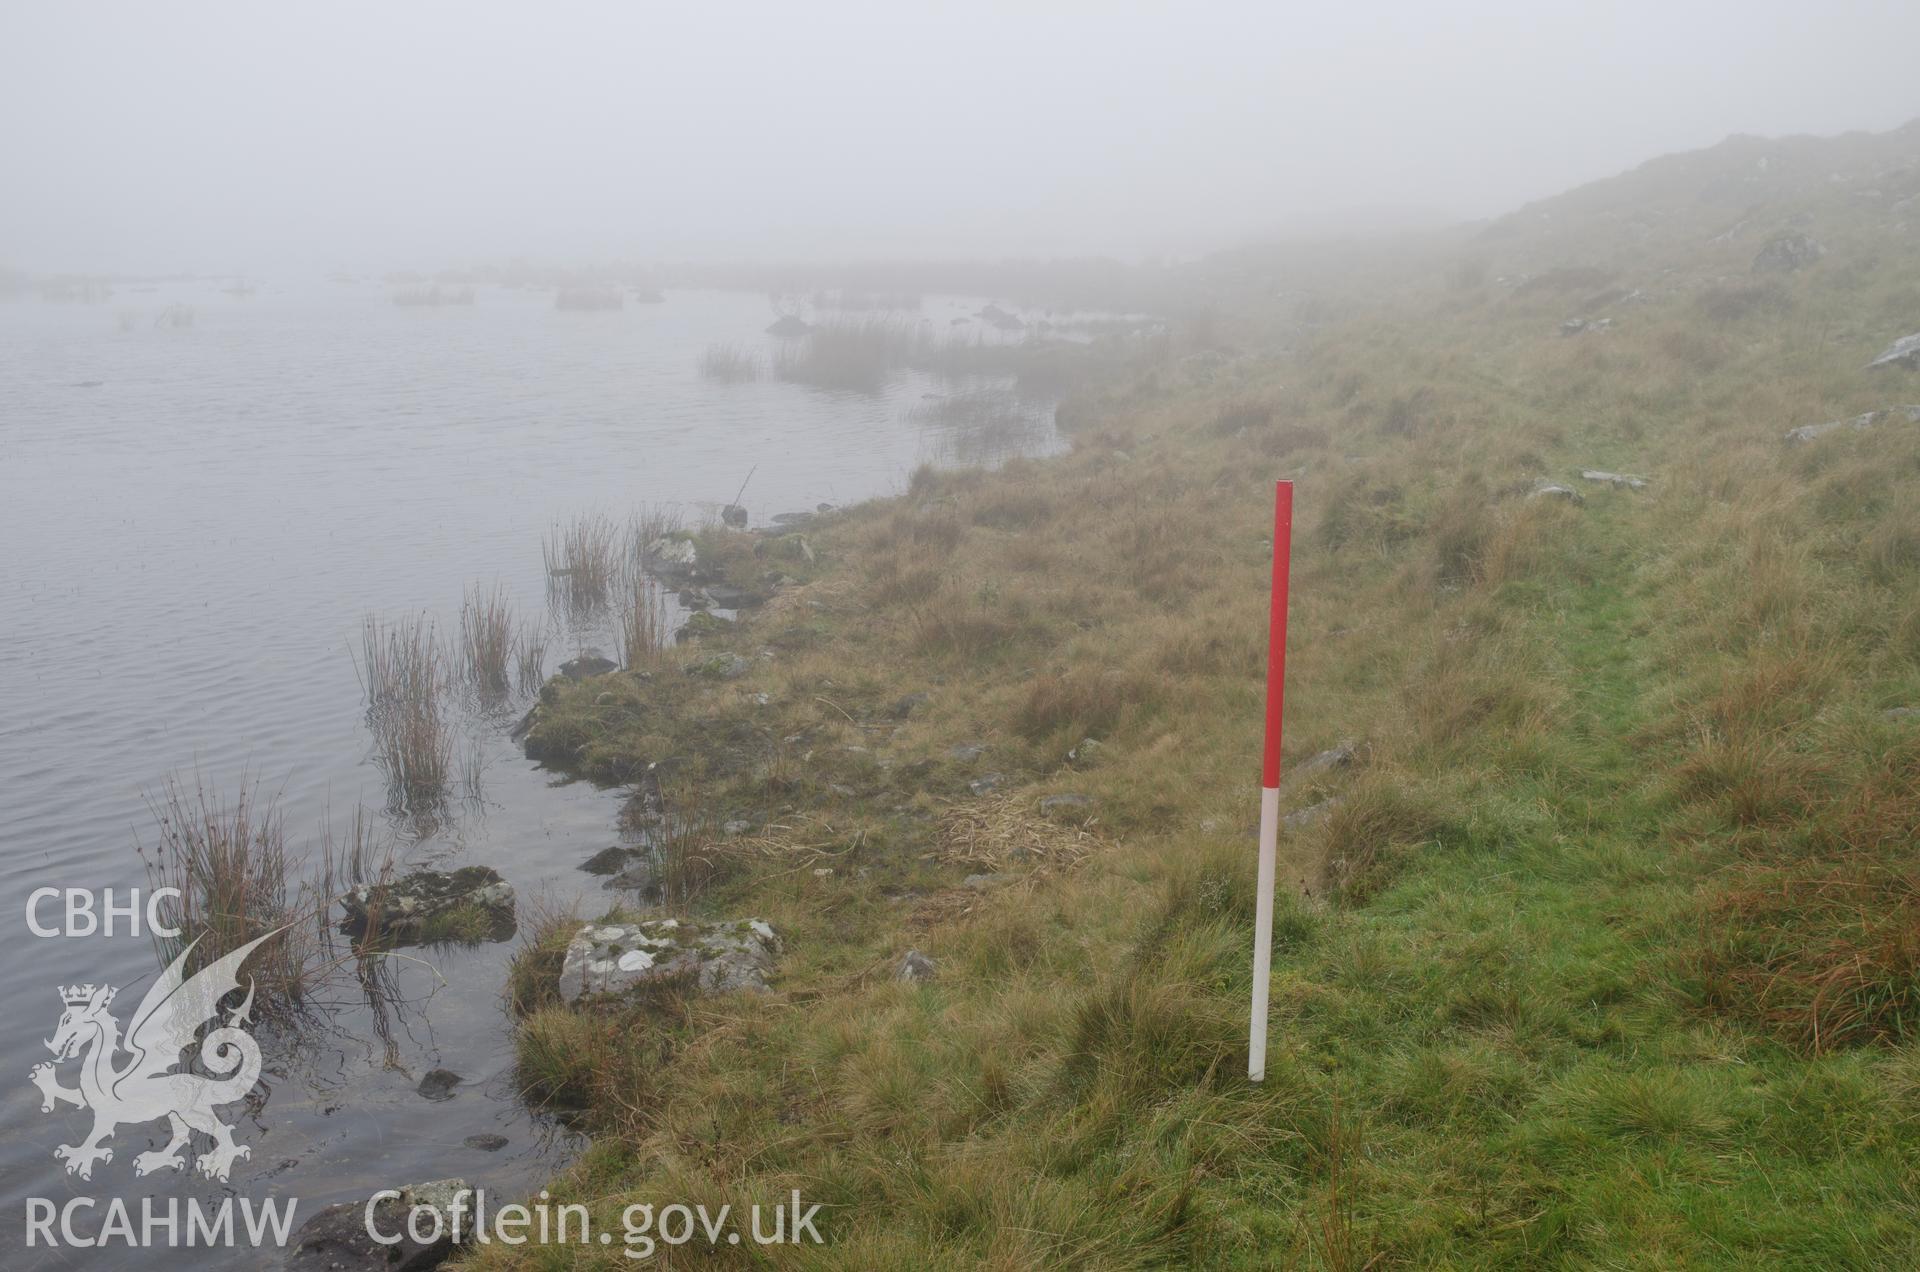 View from the north of Llyn Gelli-Gain reservoir bank, Trawsfynydd. Photographed as part of archaeological assessment conducted by Gwynedd Archaeological Trust on 16th October 2018. Project no. 2579.